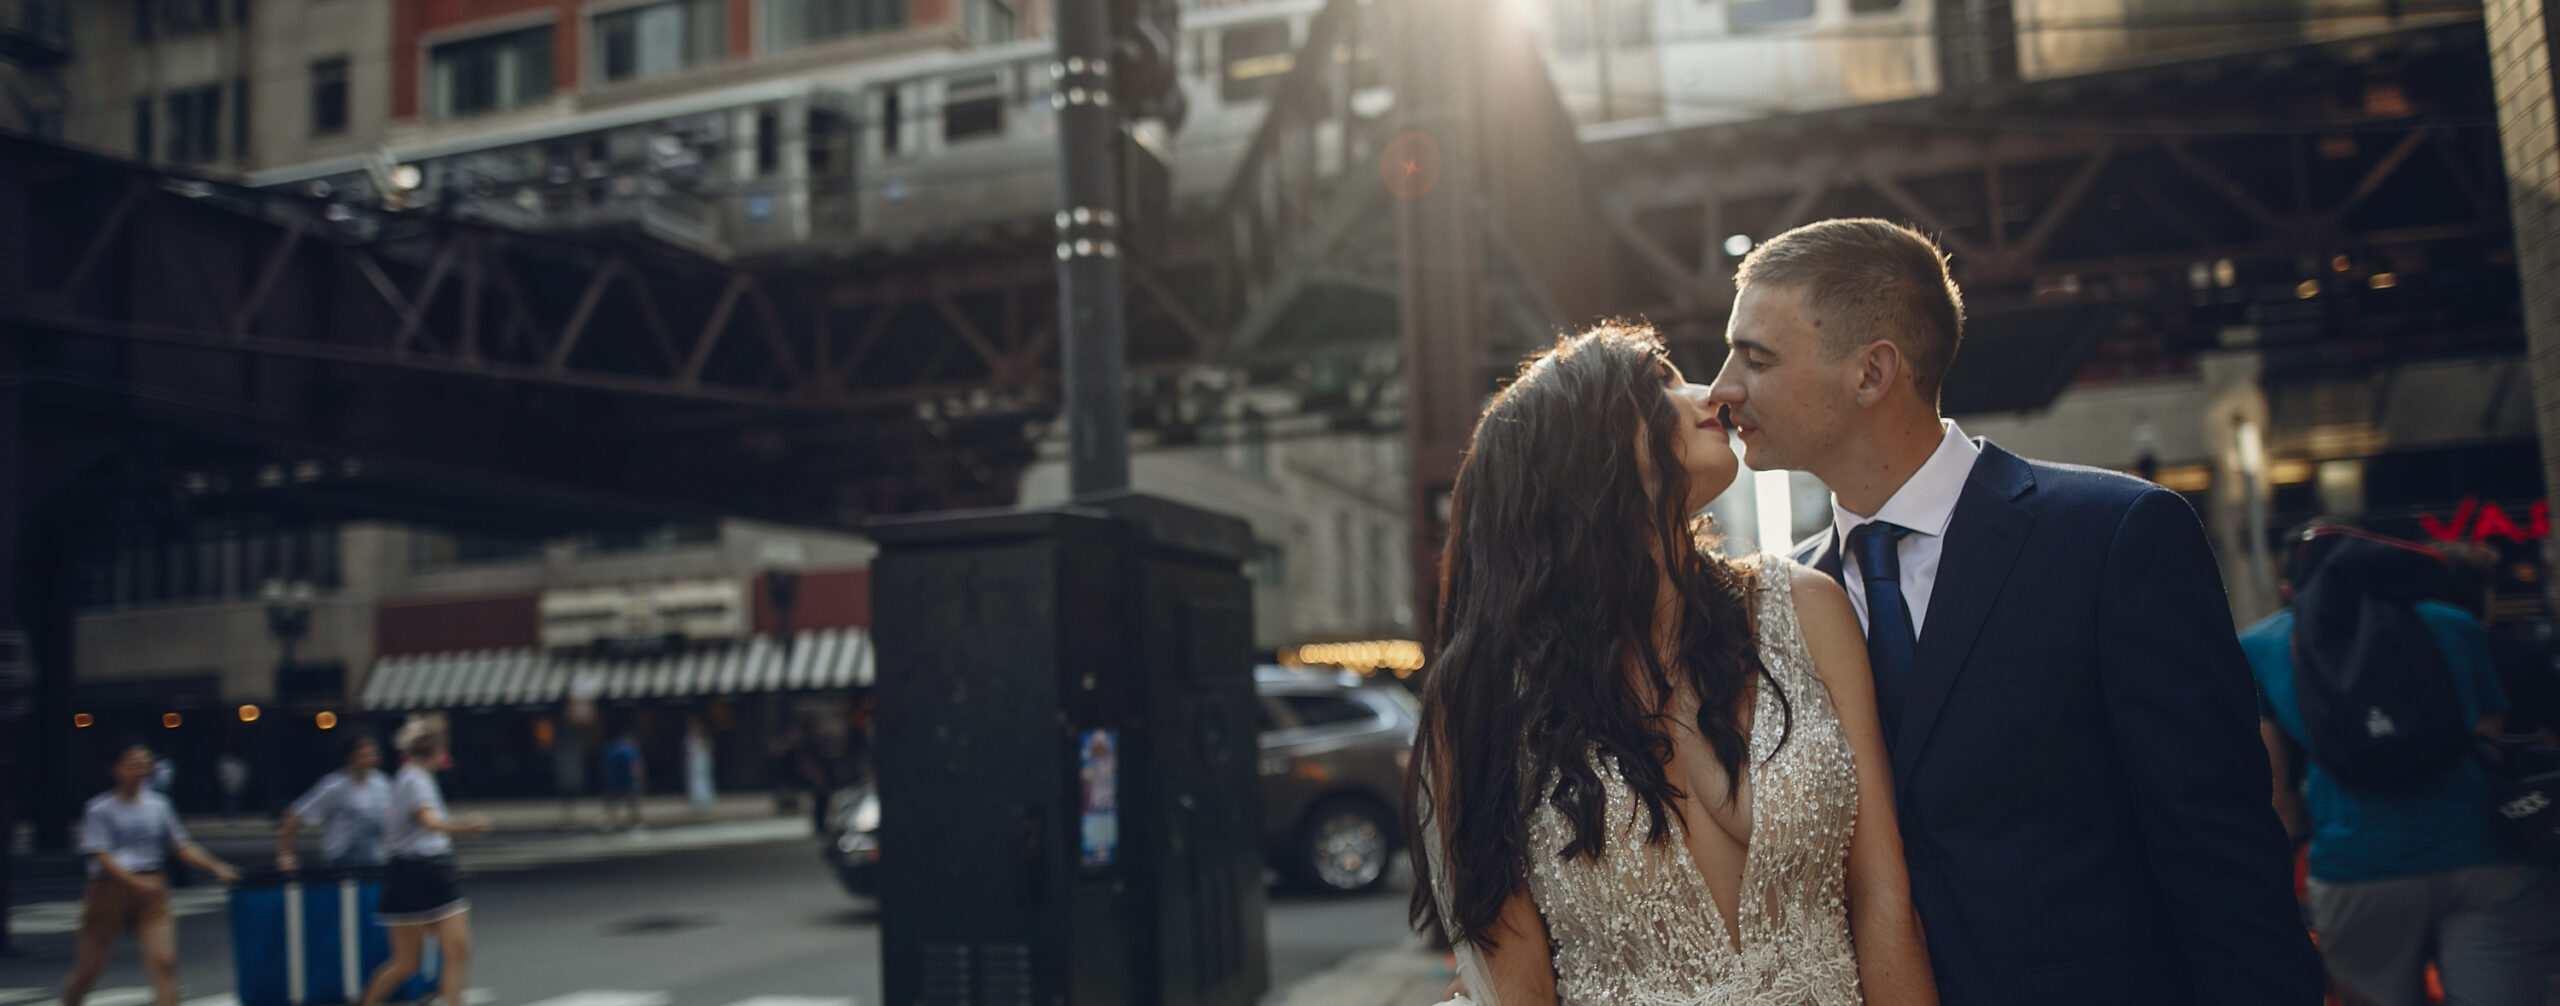 bride-and-groom-kissing-under-a-bridge-in-the-city